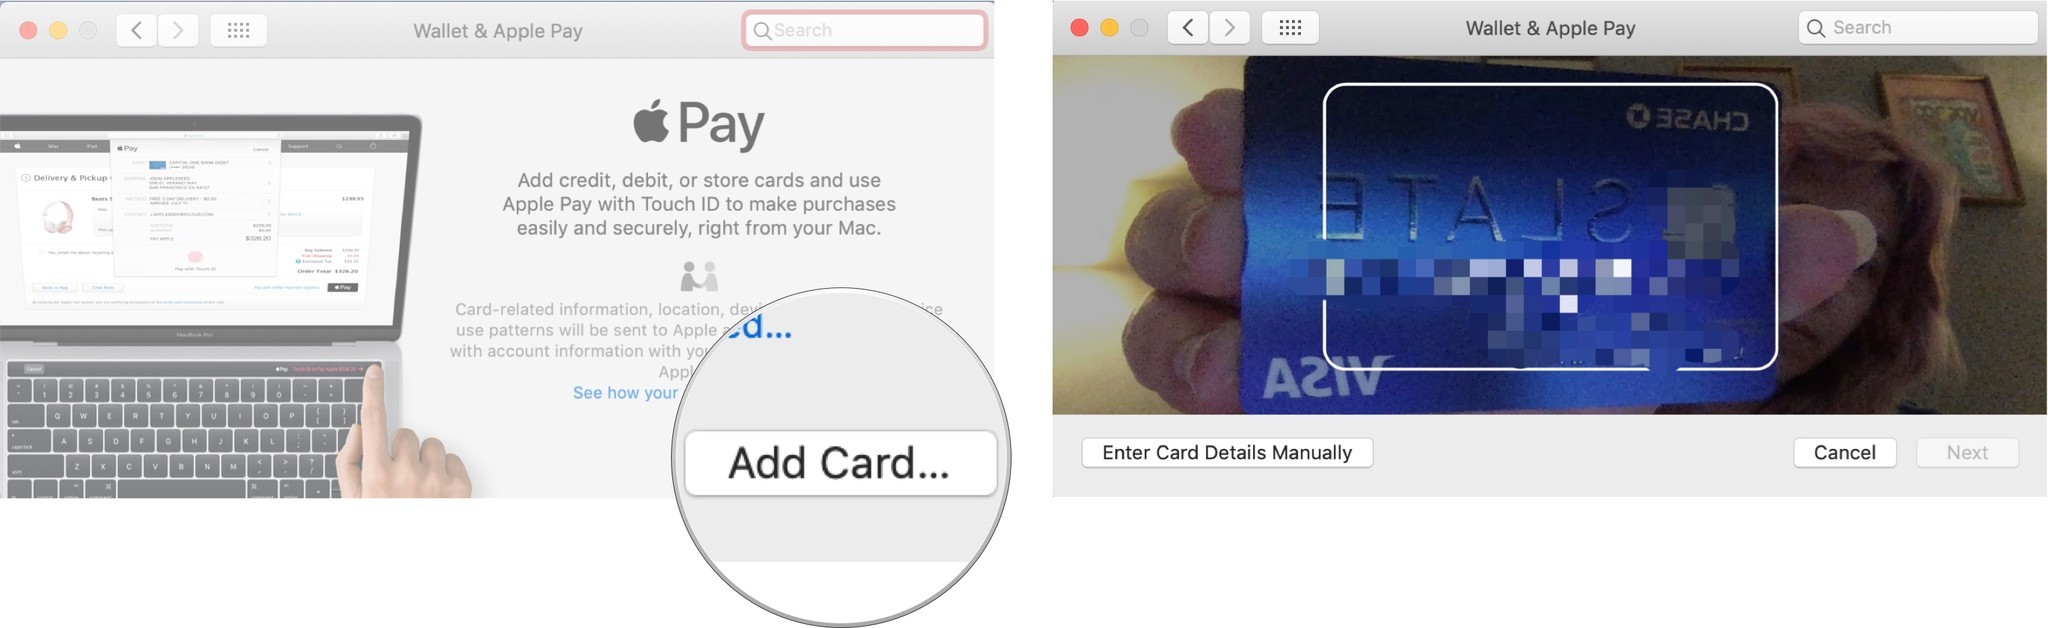 Setting up Apple Pay on the Mac showing steps for Click on Add Card, then use the iSight camera or enter the card number manually